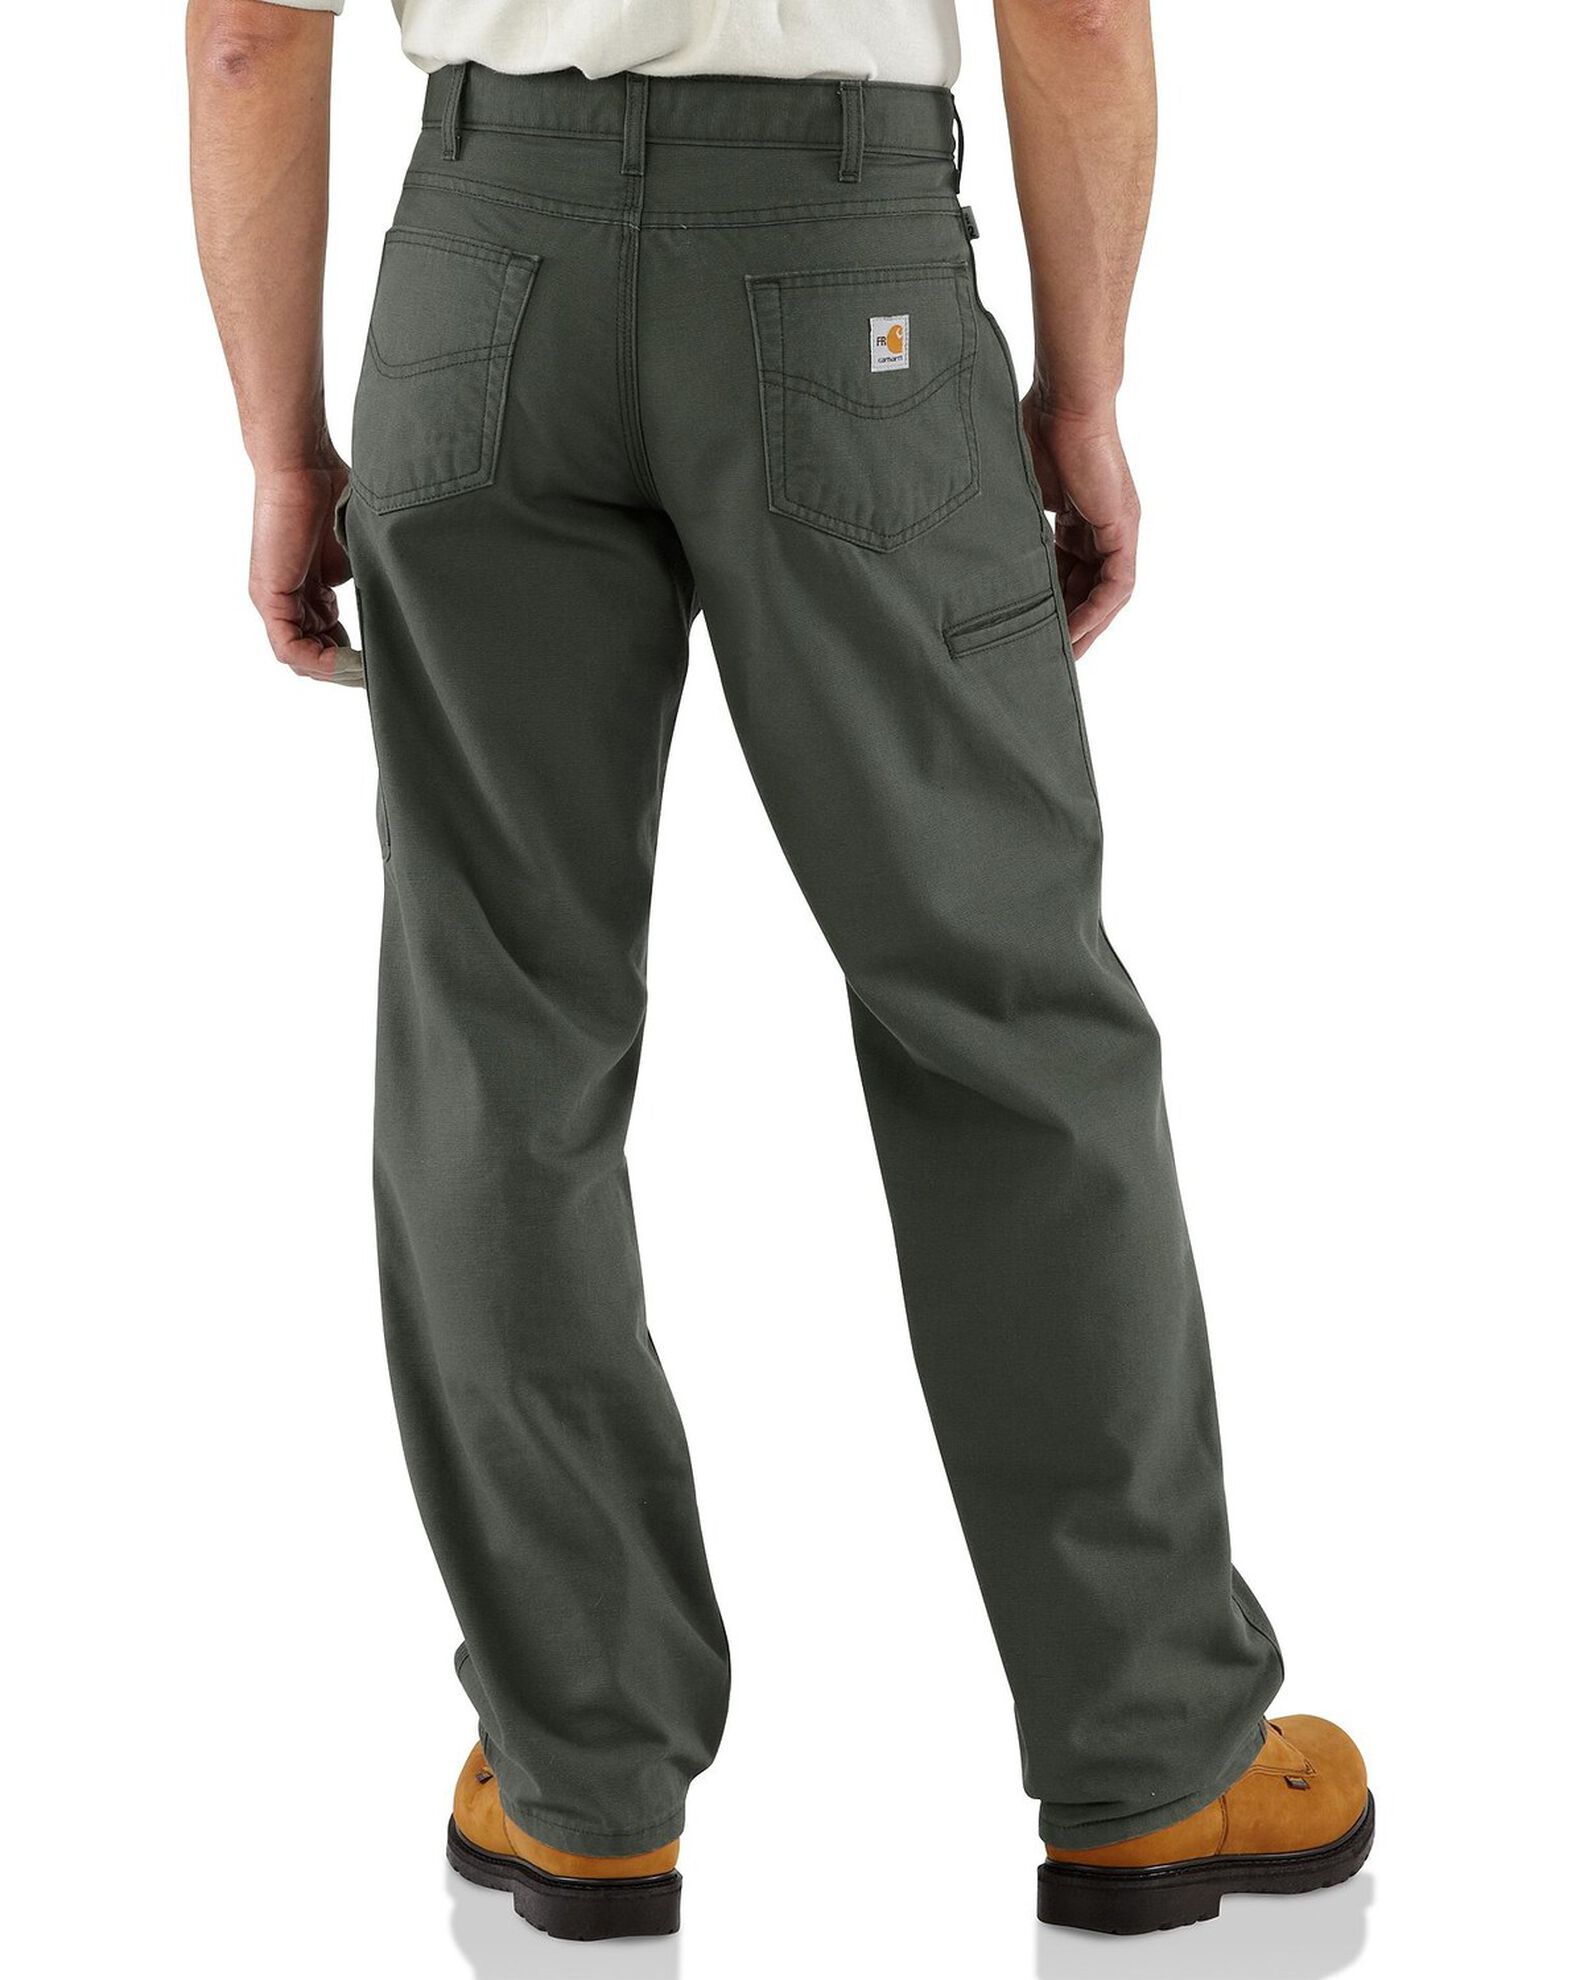 NWT Carhartt Men's Flame Resistant Cargo Pant Work Construction